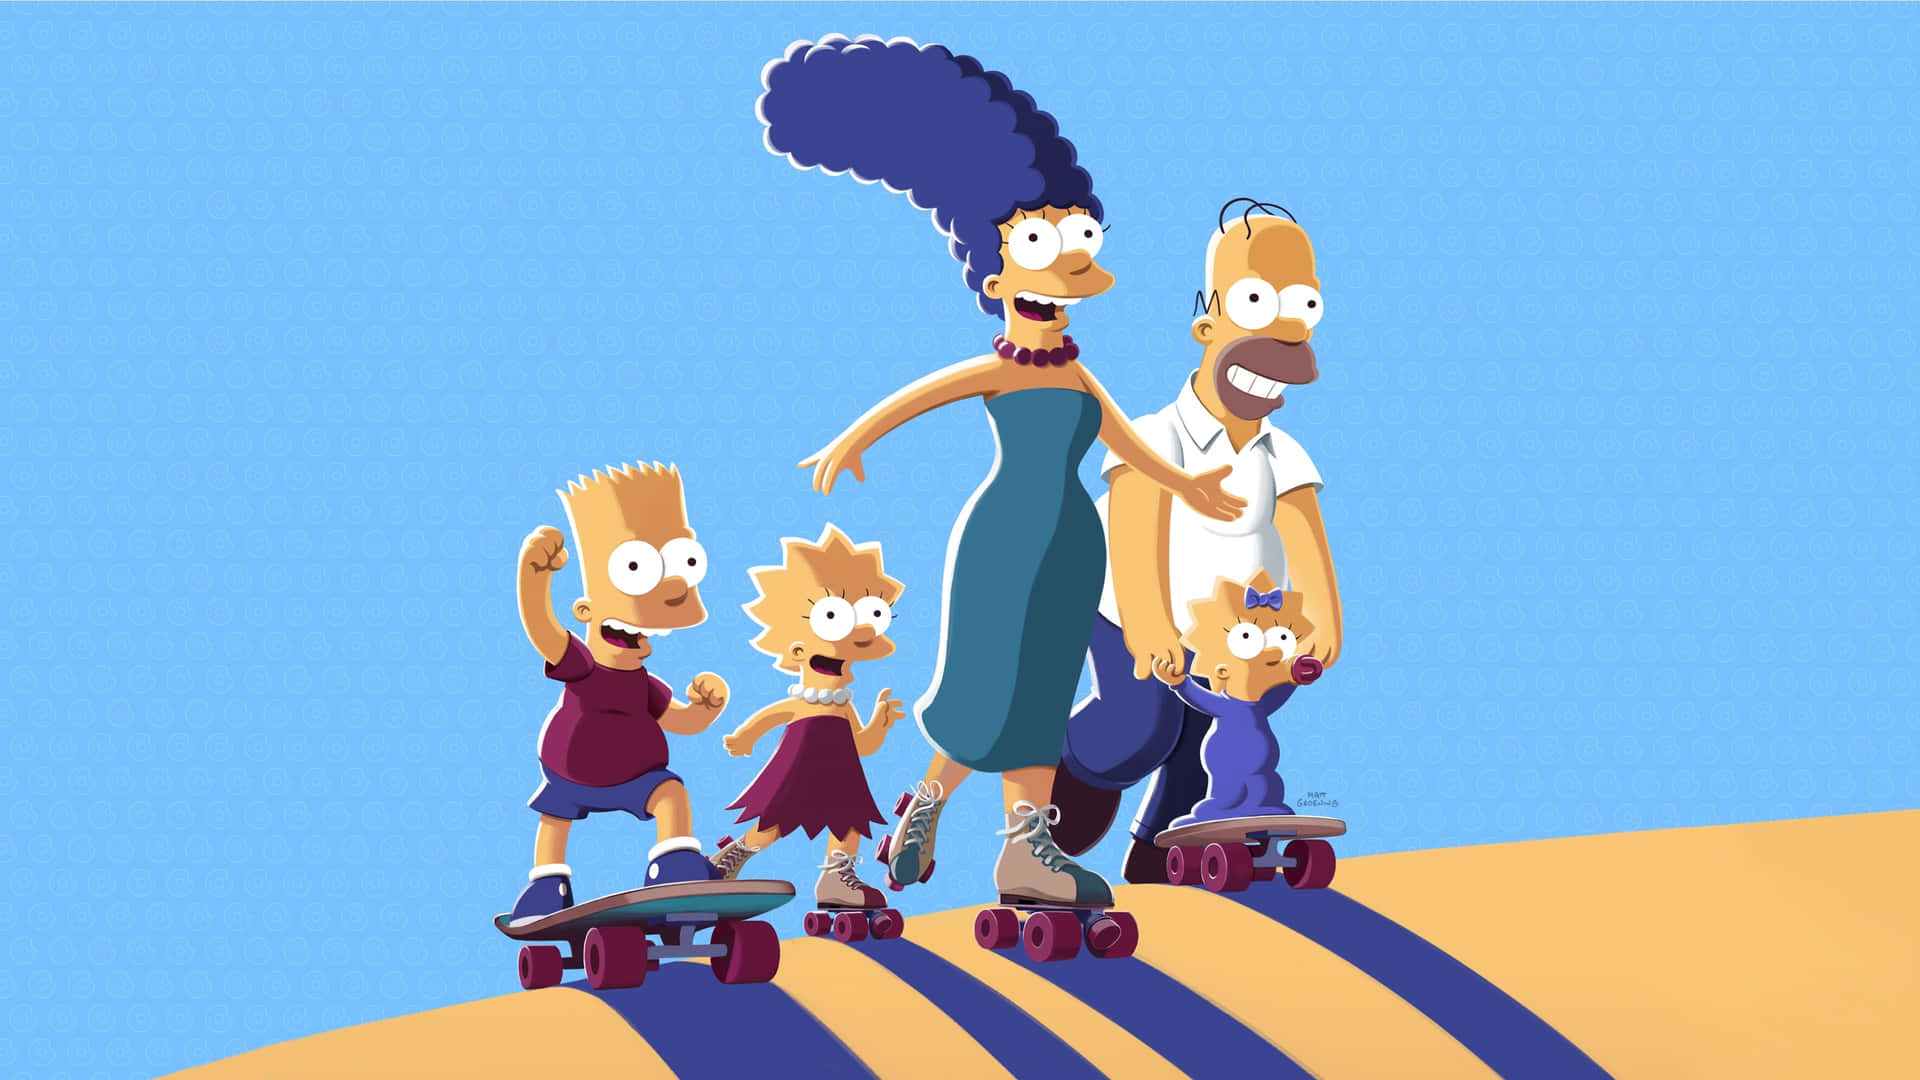 Upgrade Your PC with ‘The Simpsons’ Wallpaper